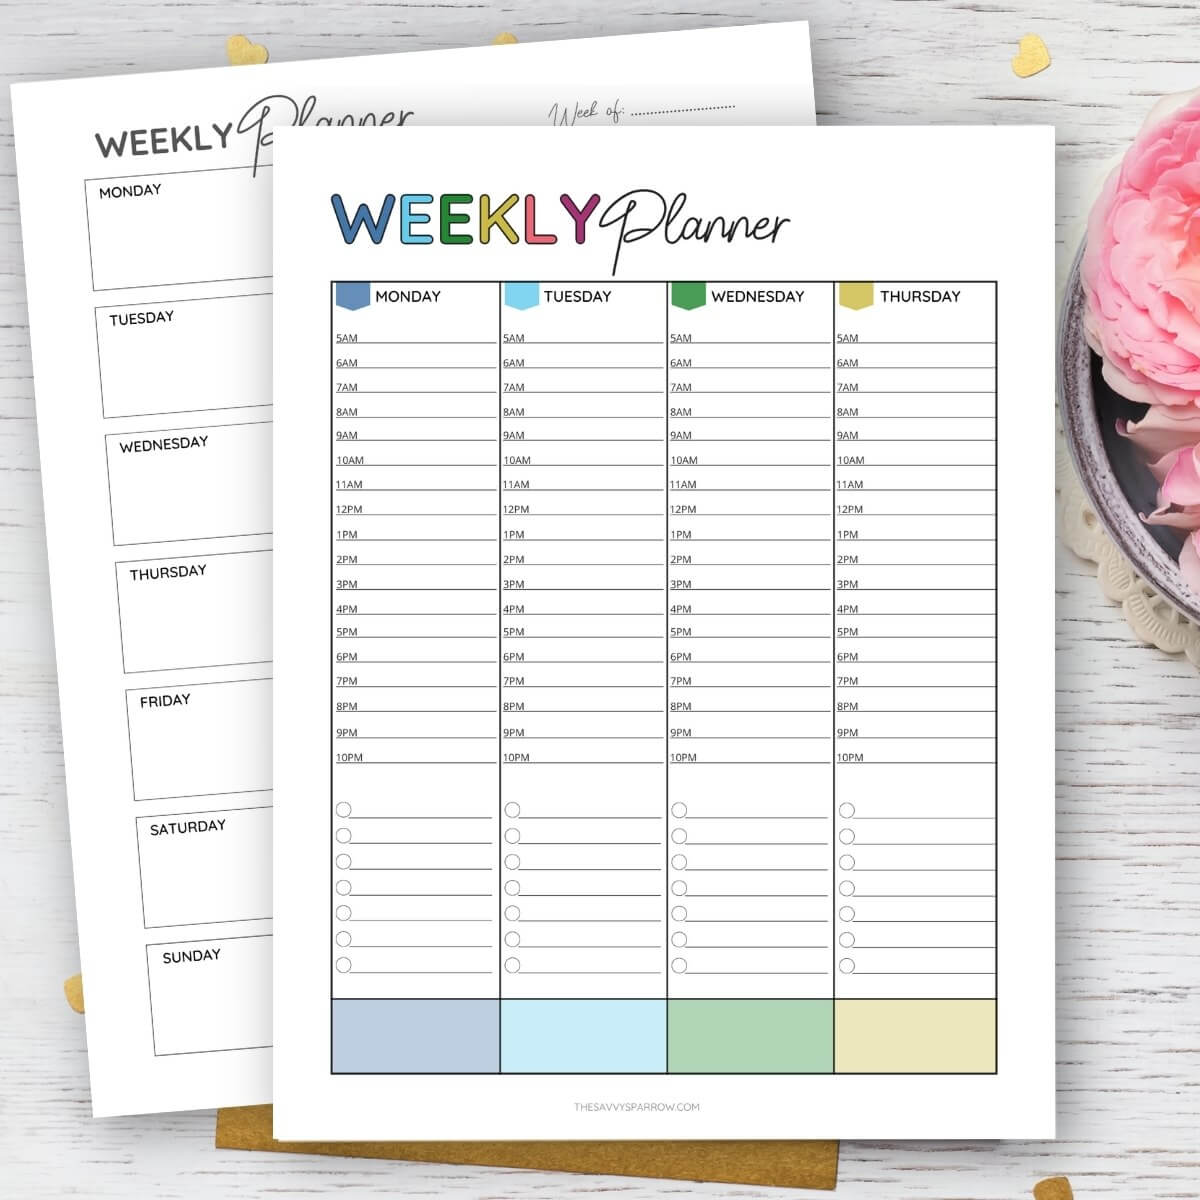 Free Printable Weekly Planner Templates to Help You Schedule Your Life